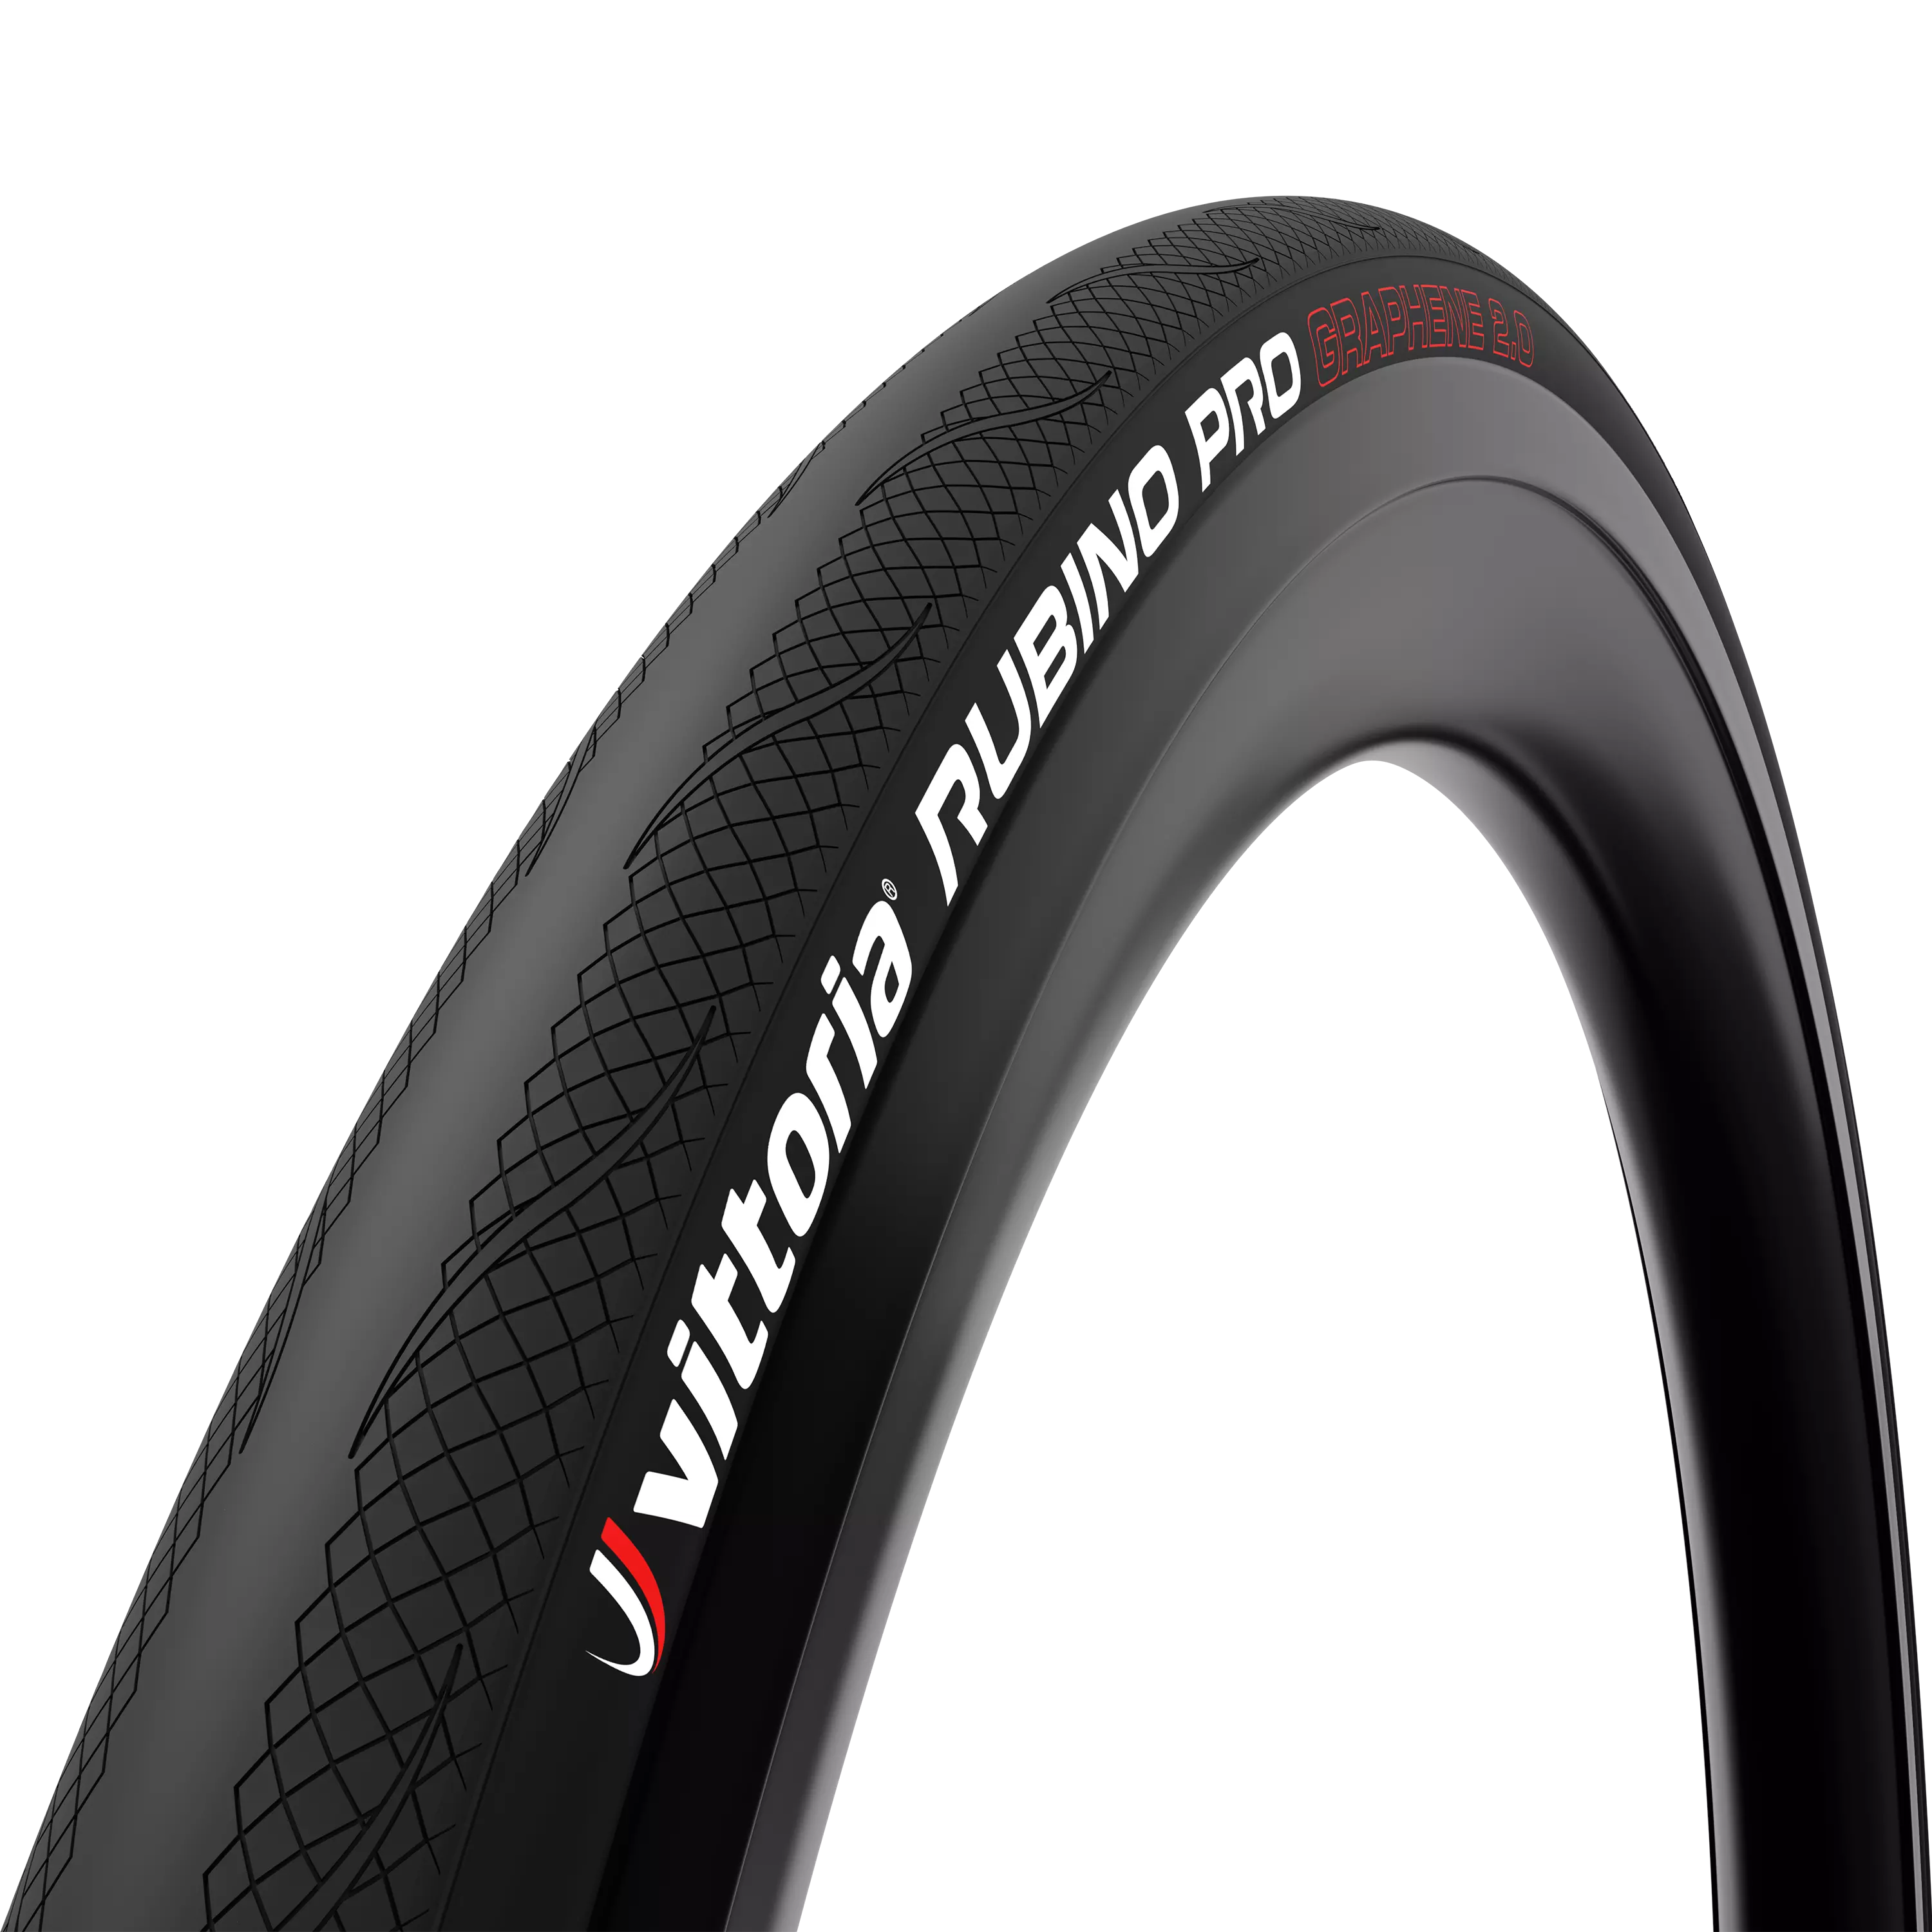 Continental Grand Sport Race ULTRA Sport III Tires Clincher Black Road Tire  sSpeed 700x25C 23C 28C Foldable Road Bicycle Tyre